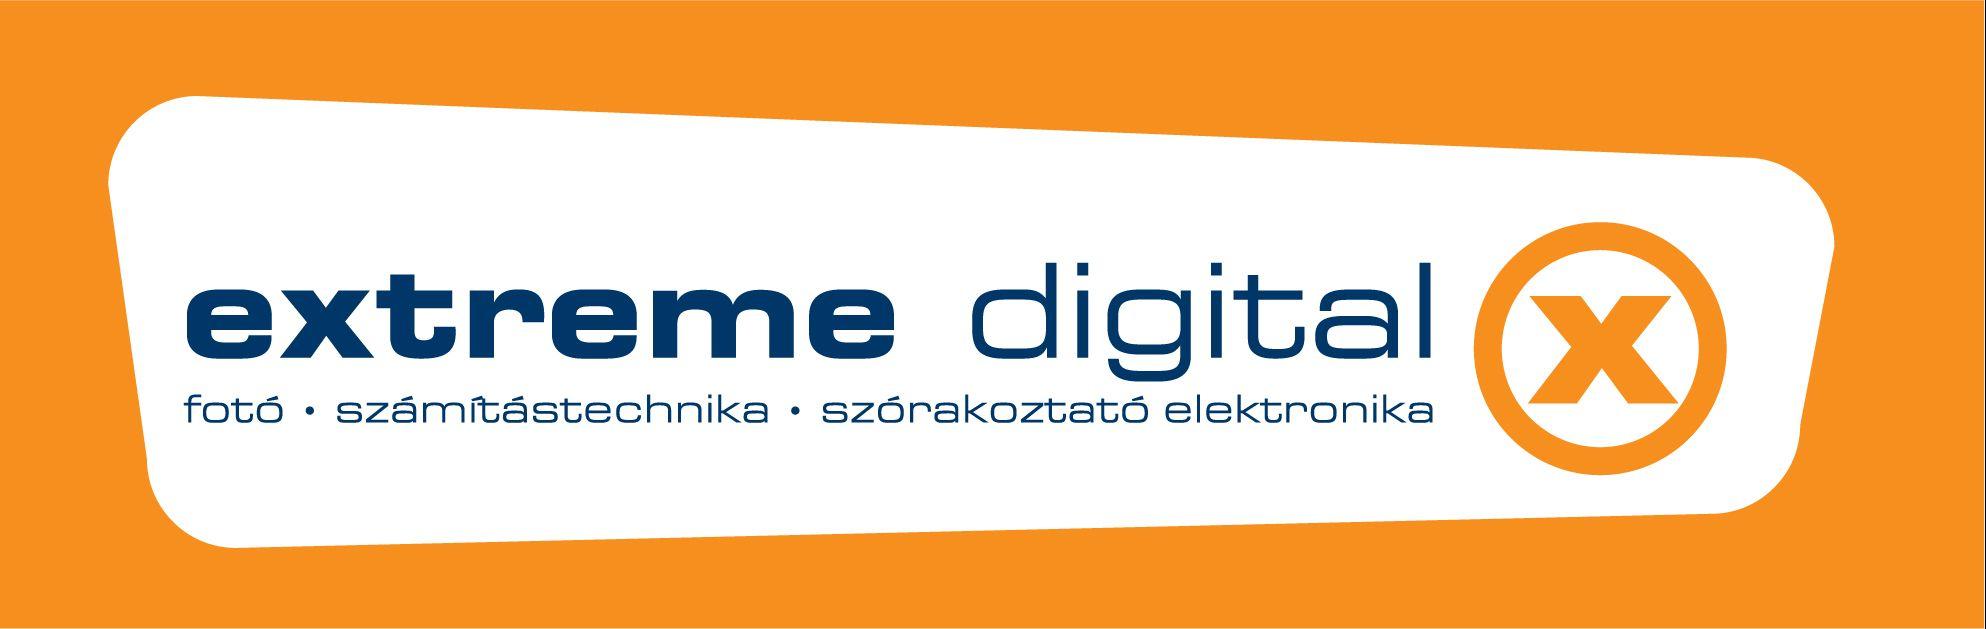 Competition Authority Fines Extreme Digital